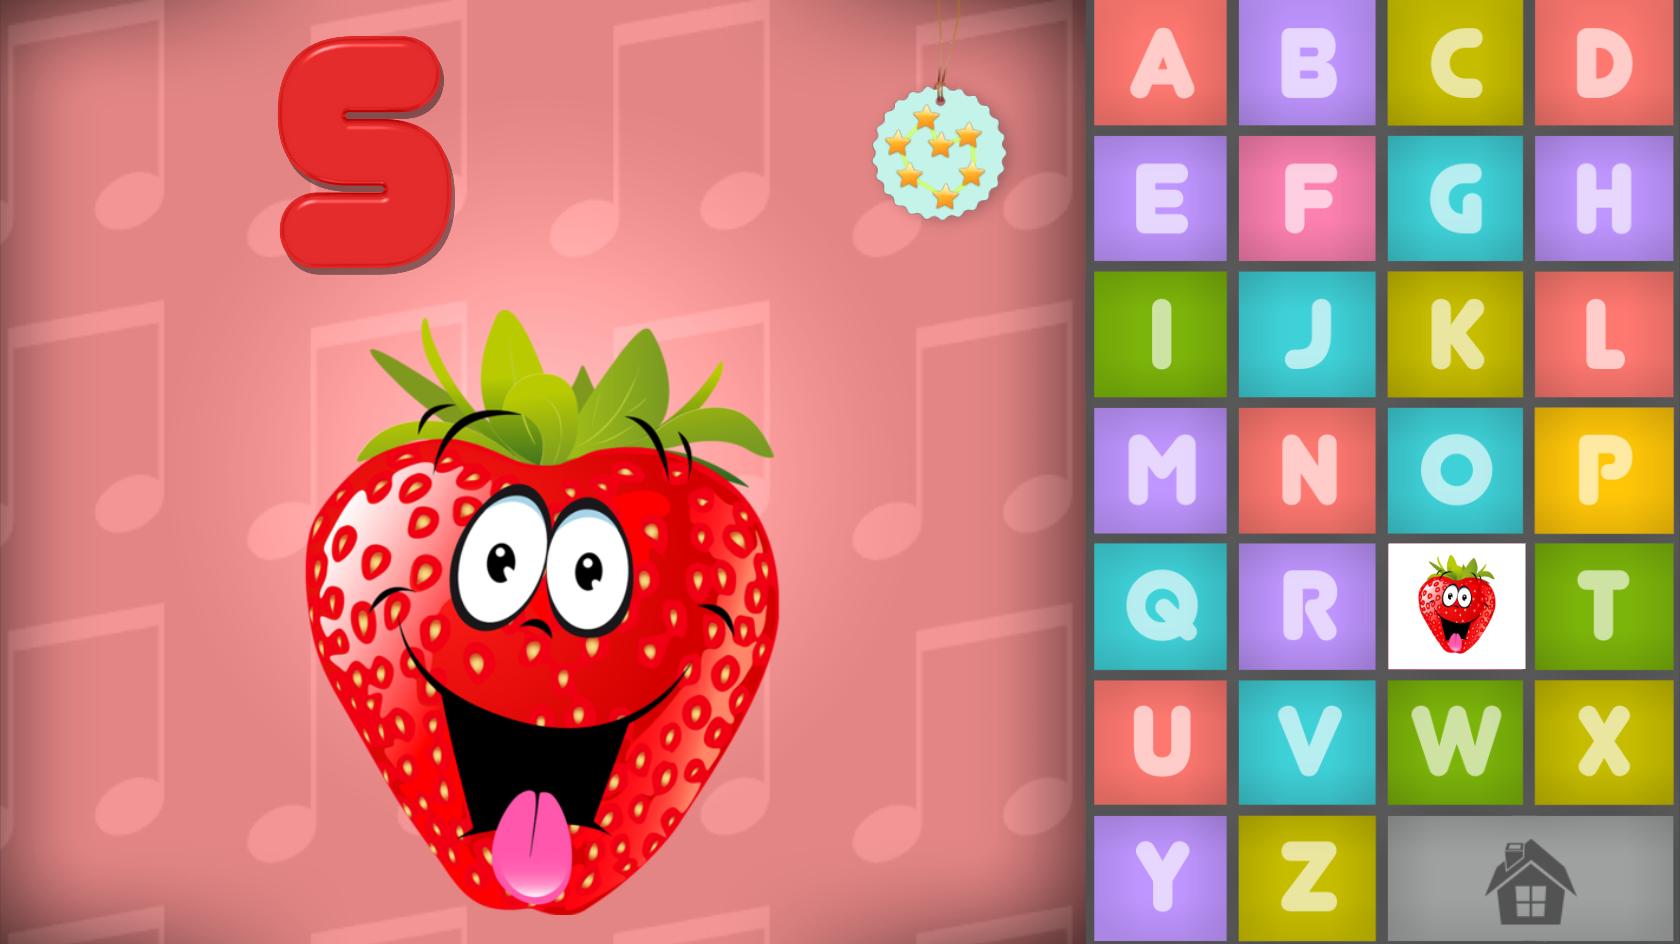 Talking ABC - English for Android - APK Download